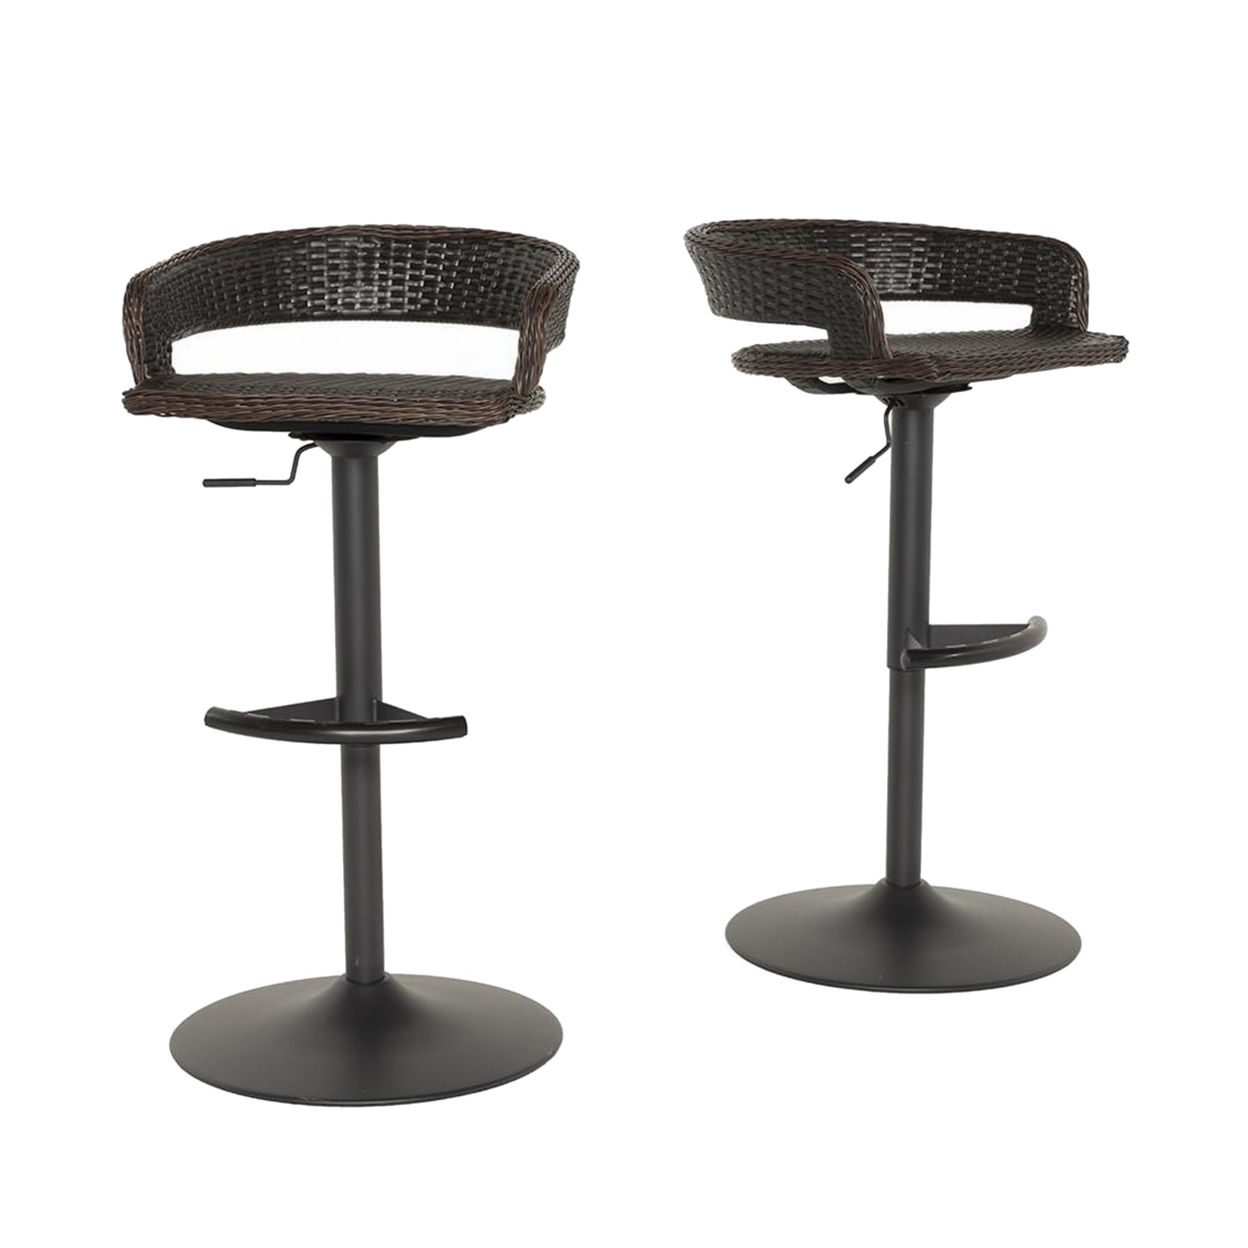 Coco 30 Inch Set Of 2 Patio Airlift Bar Stools With Wicker Frame, Espresso- Saltoro Sherpi